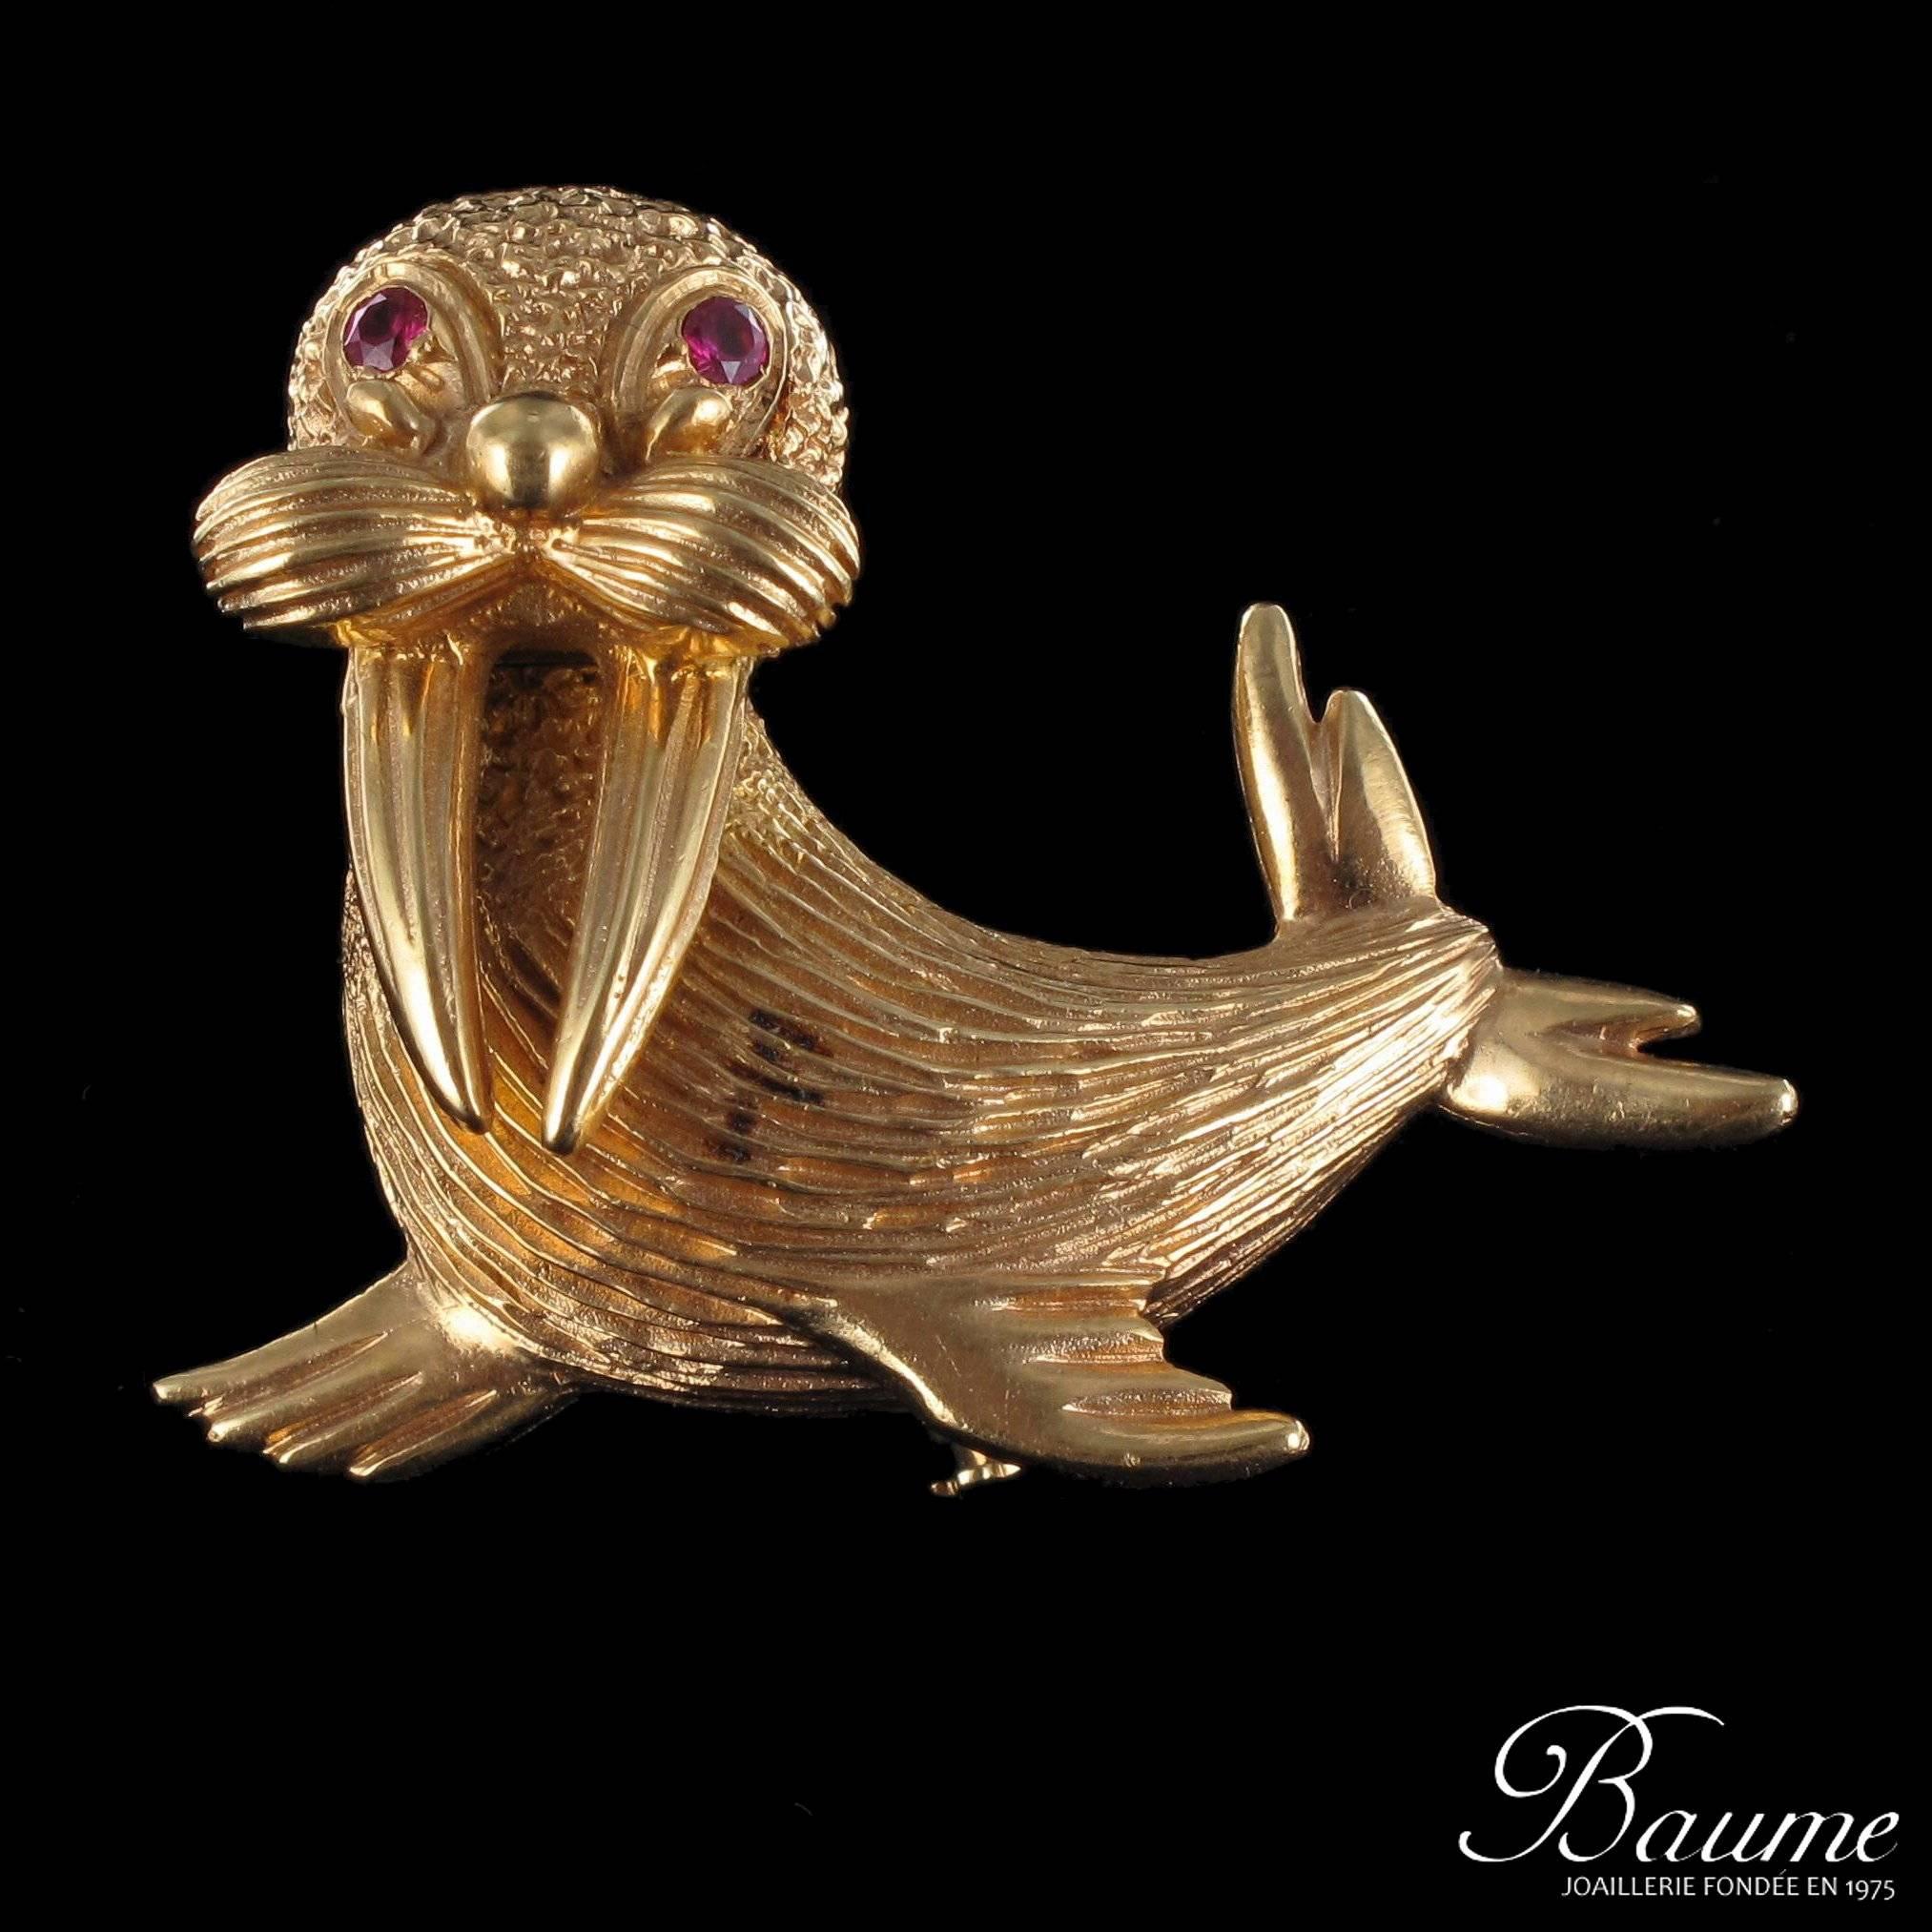 Brooch in 18 carat yellow gold.

This brooch features an ‘animal’ theme; a walrus with small synthetic rubies for eyes (typical of this period) and a textured yellow gold body. The clasp has a security pump that prevents the loss of this lovely